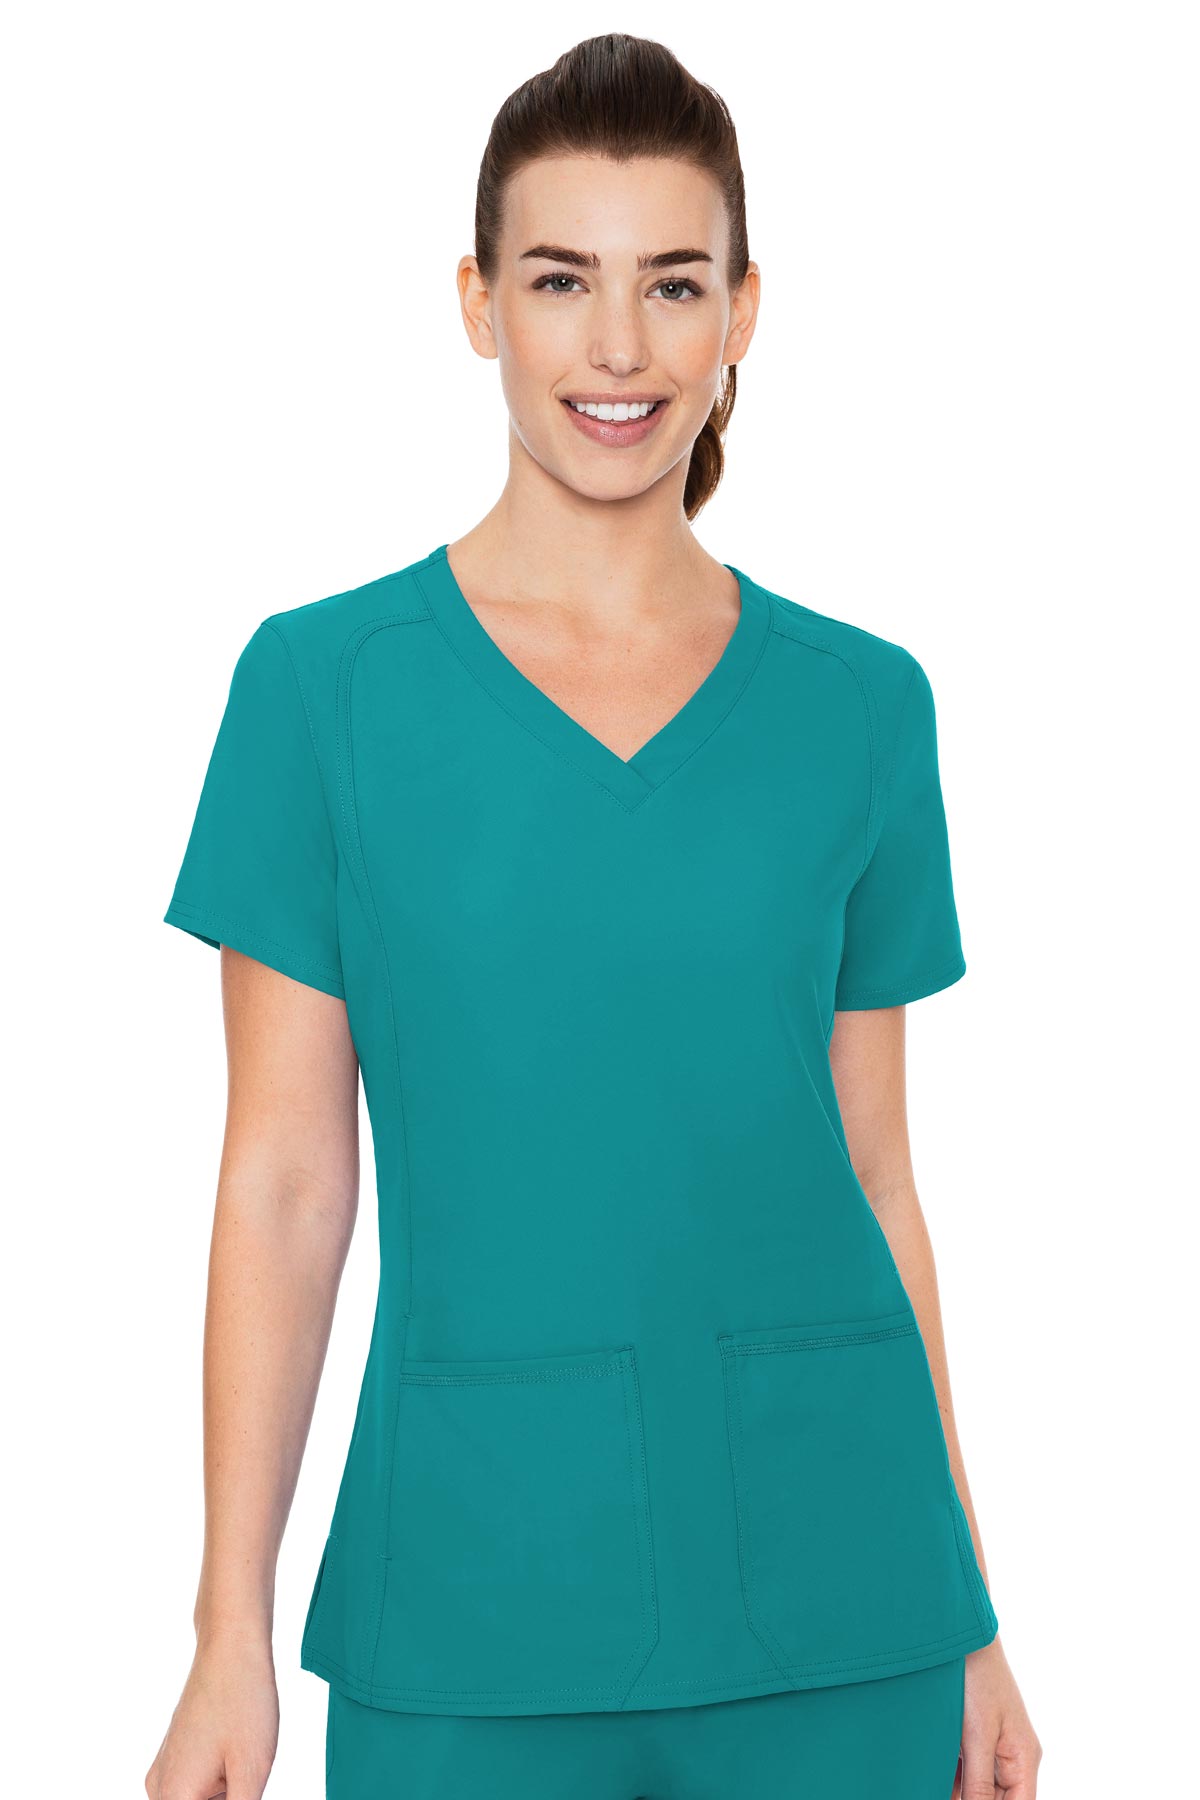 Med Couture Teal Blue TOP